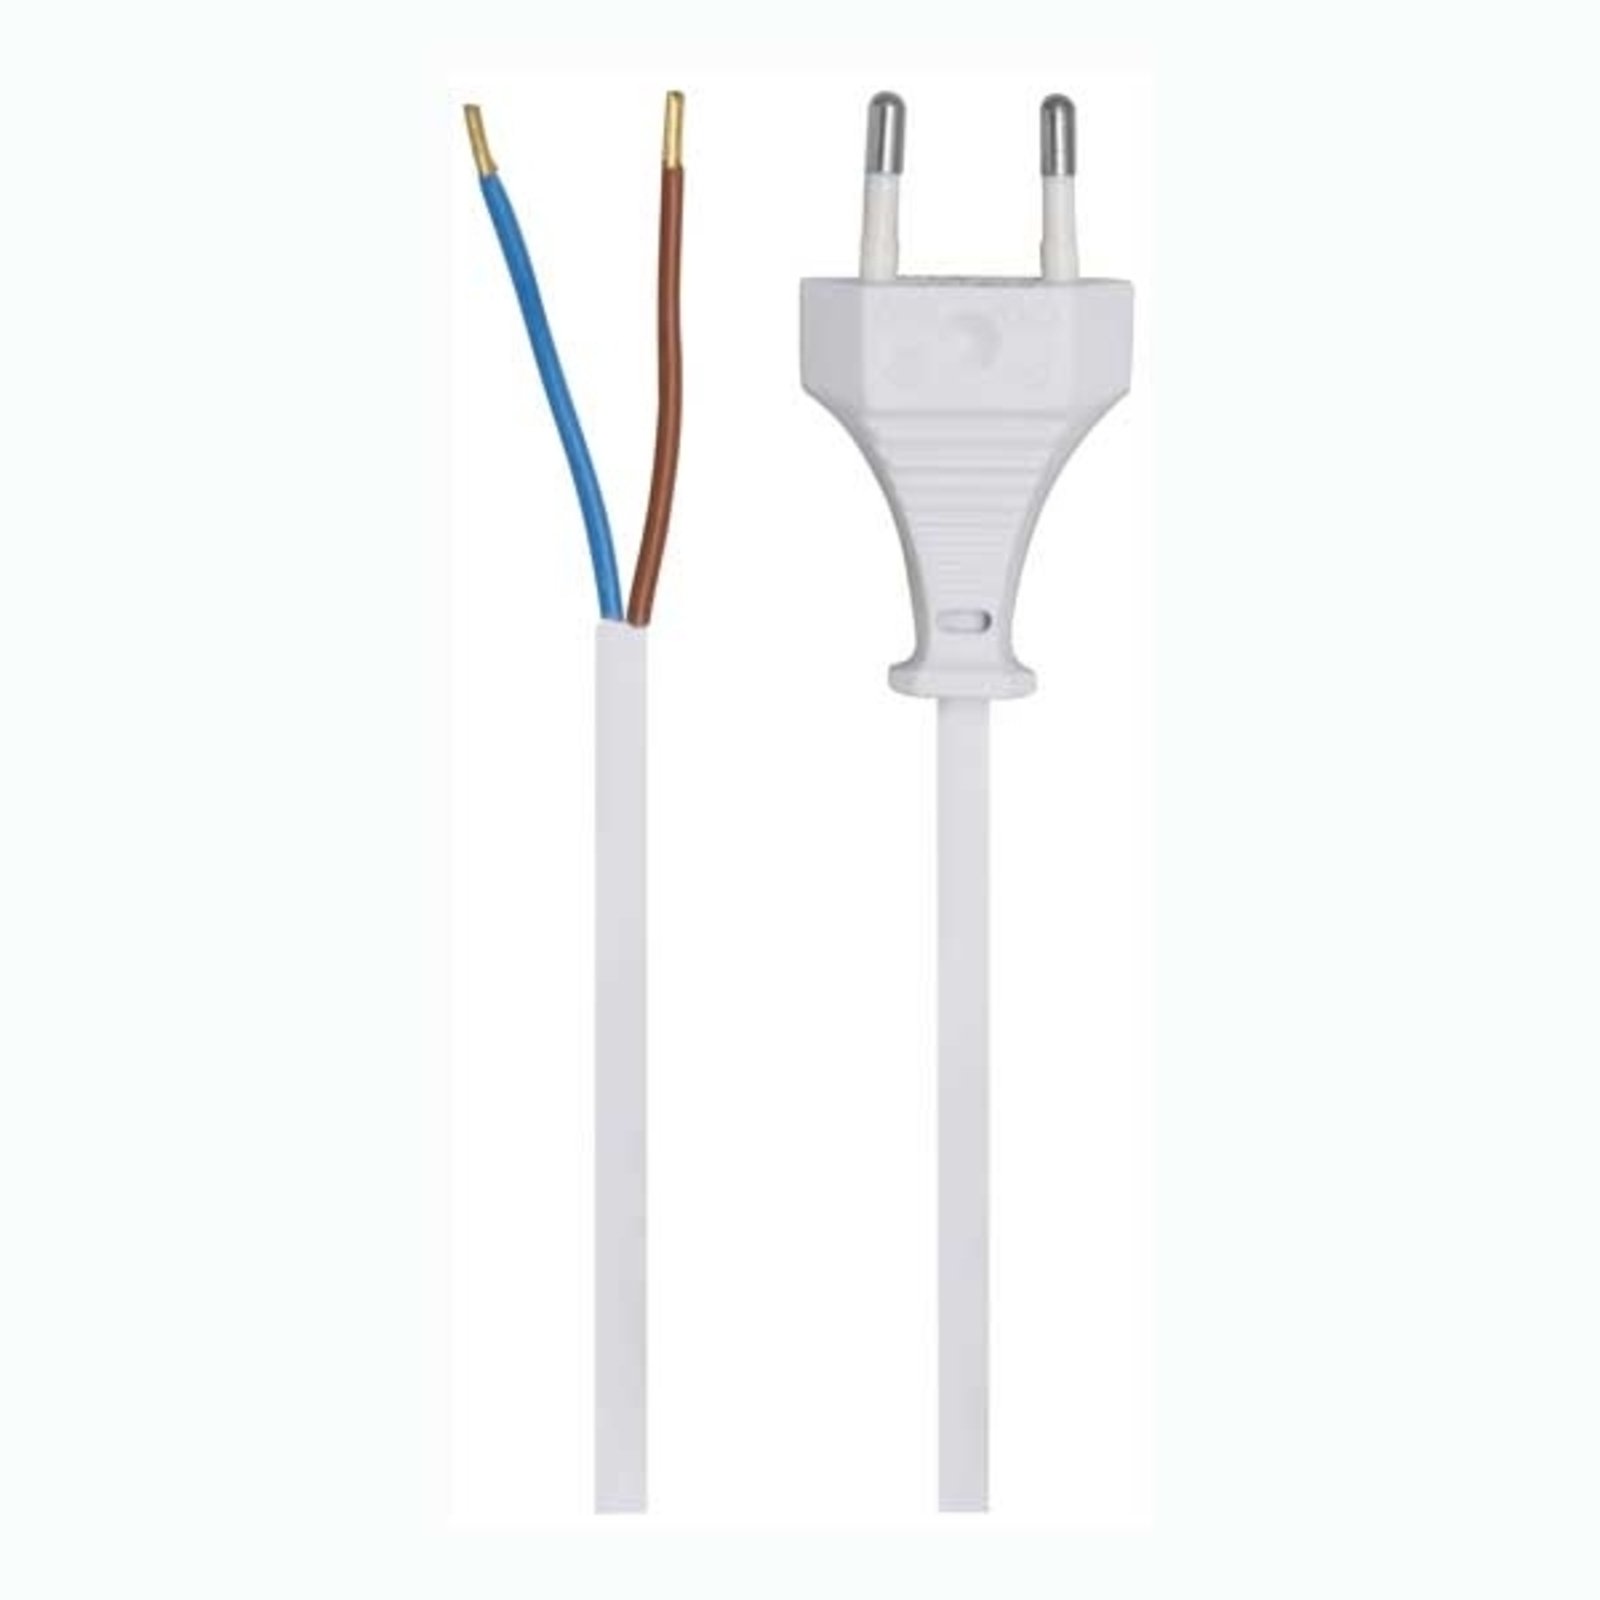 Connection cable 2x0.75² with Euro plug